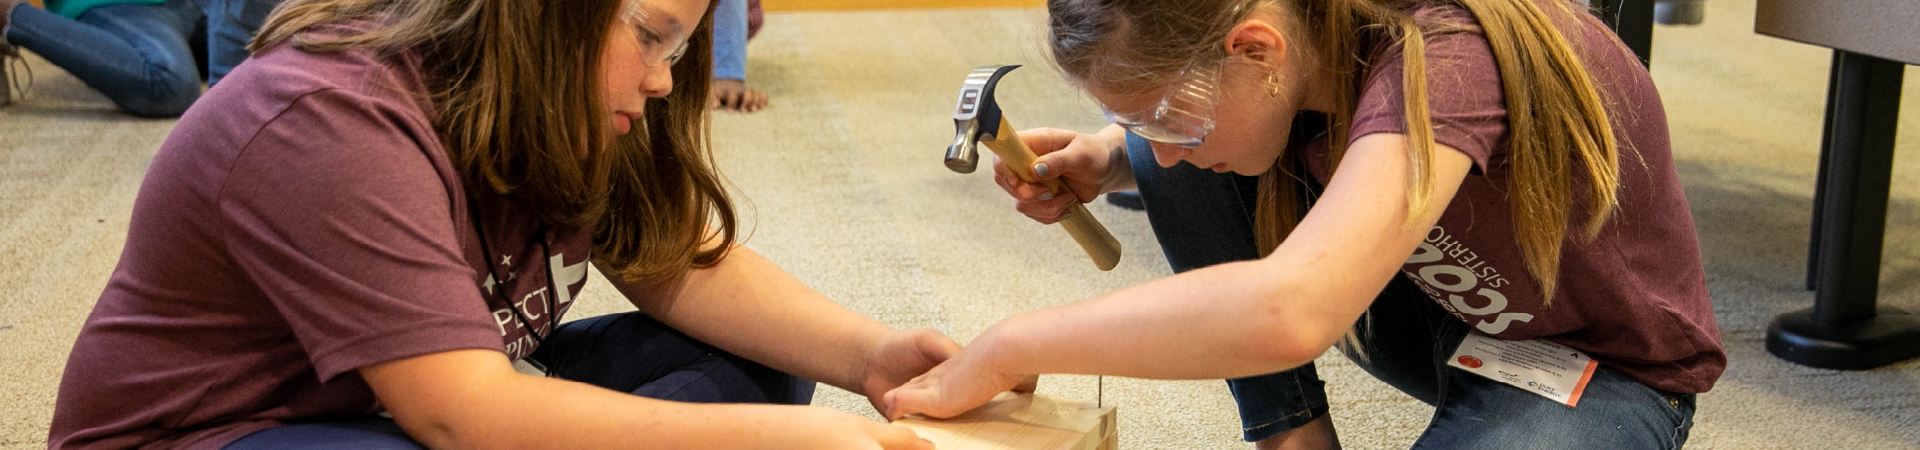  two Girl Scouts hammer on woodworking project 